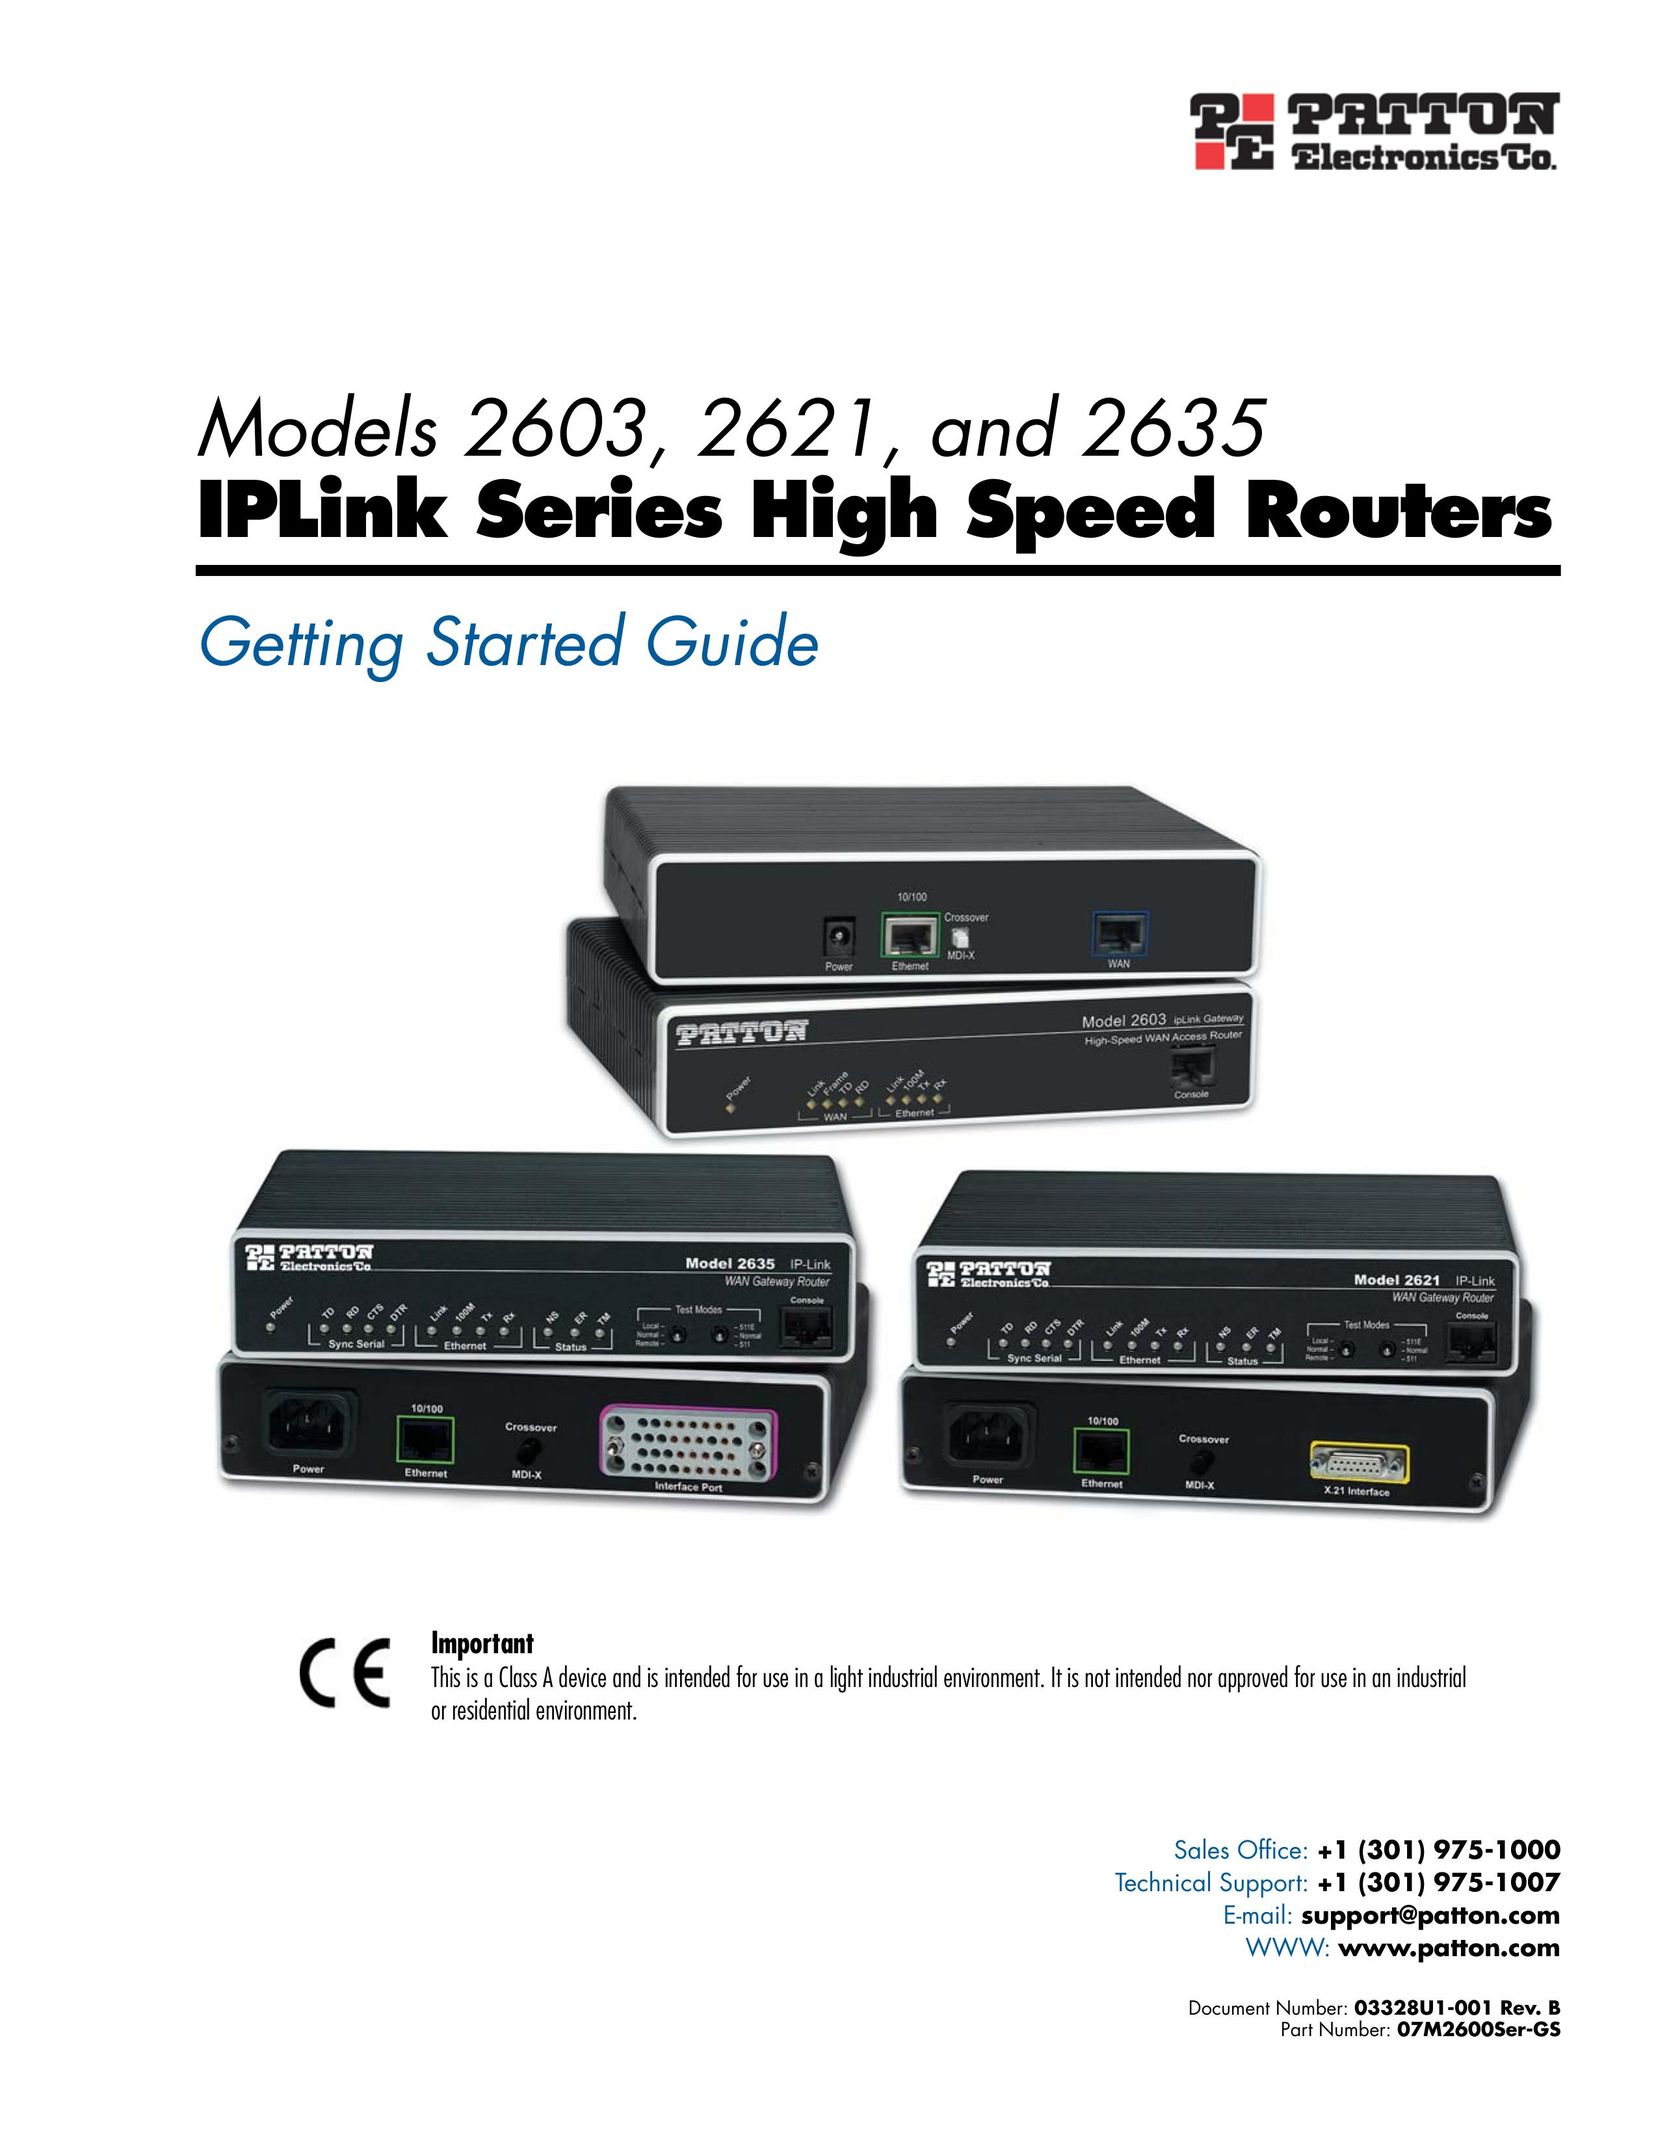 Patton electronic 2621 Router User Manual